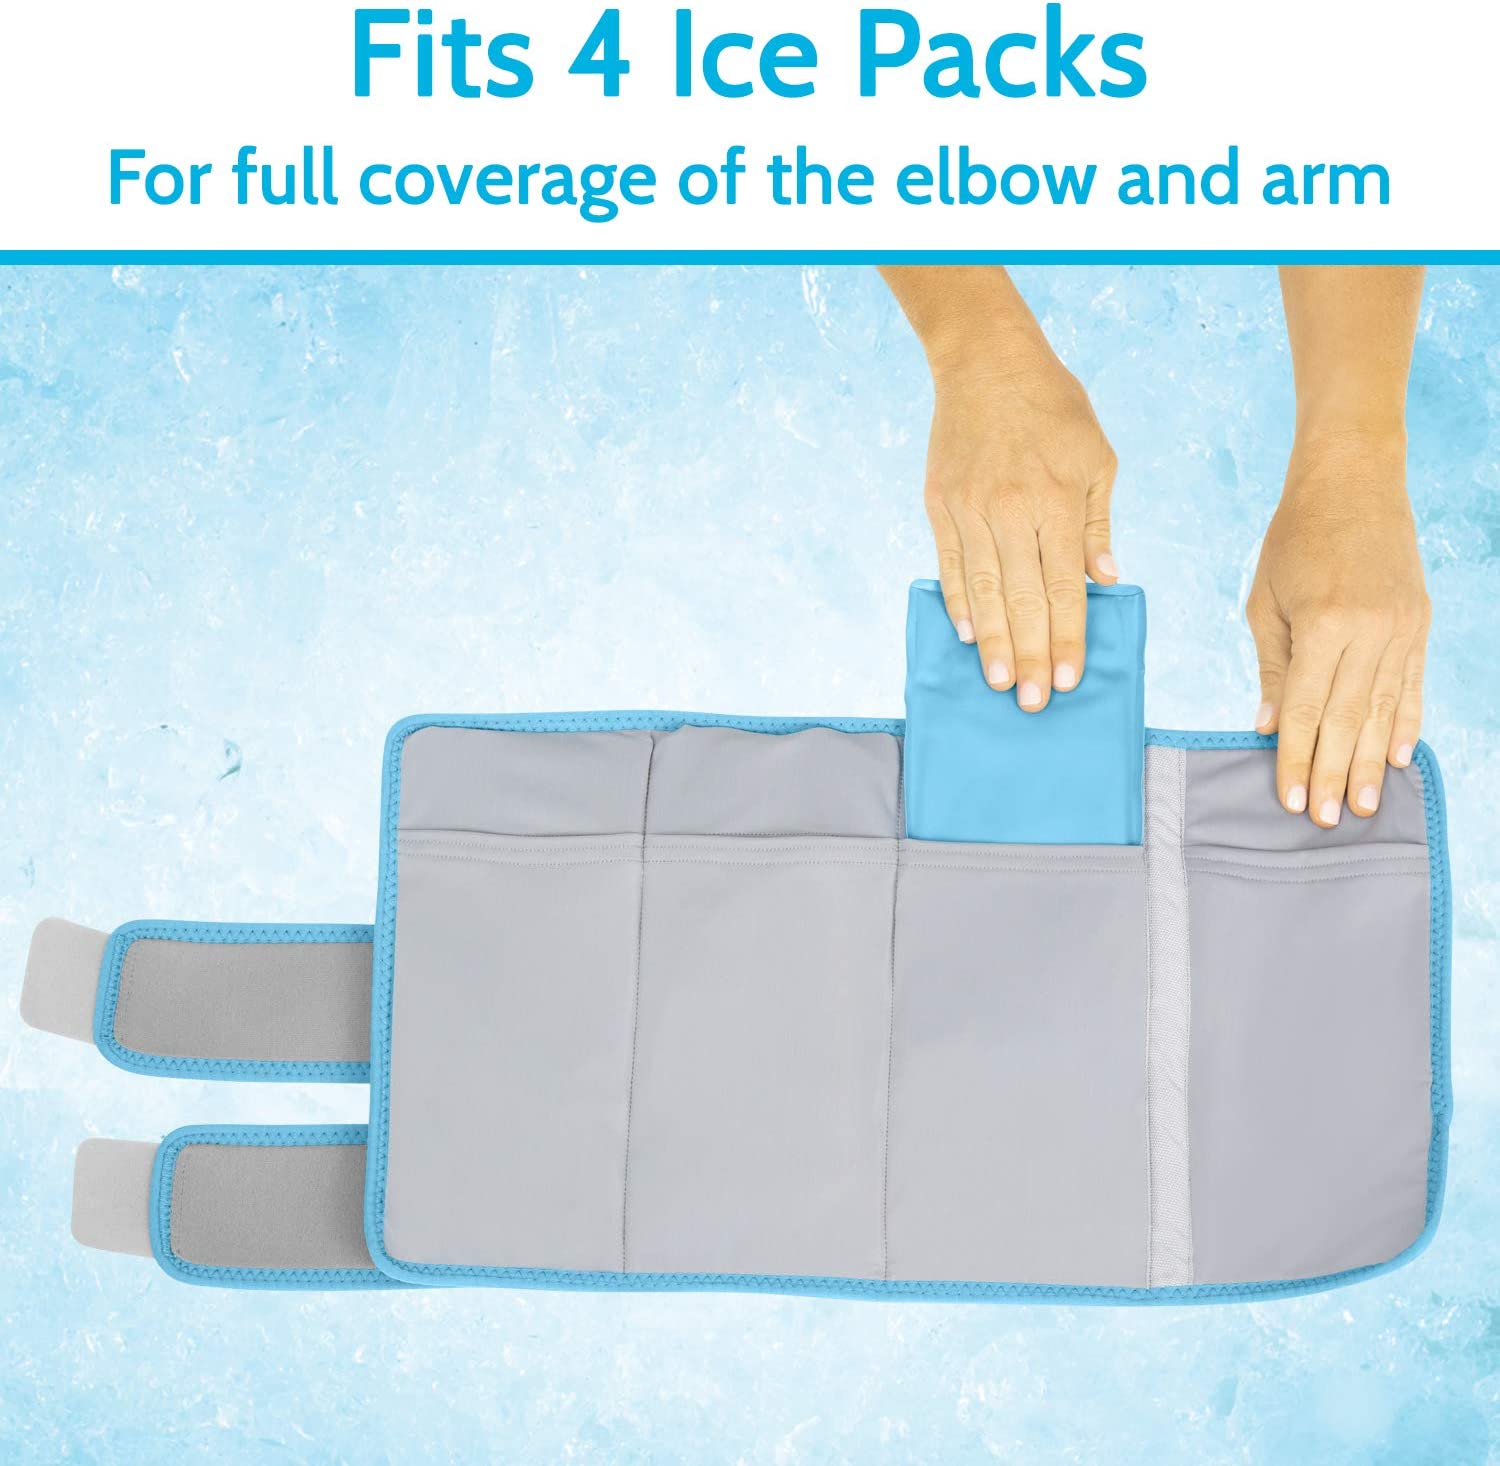 Vive Ice Pack for Elbow and arm 